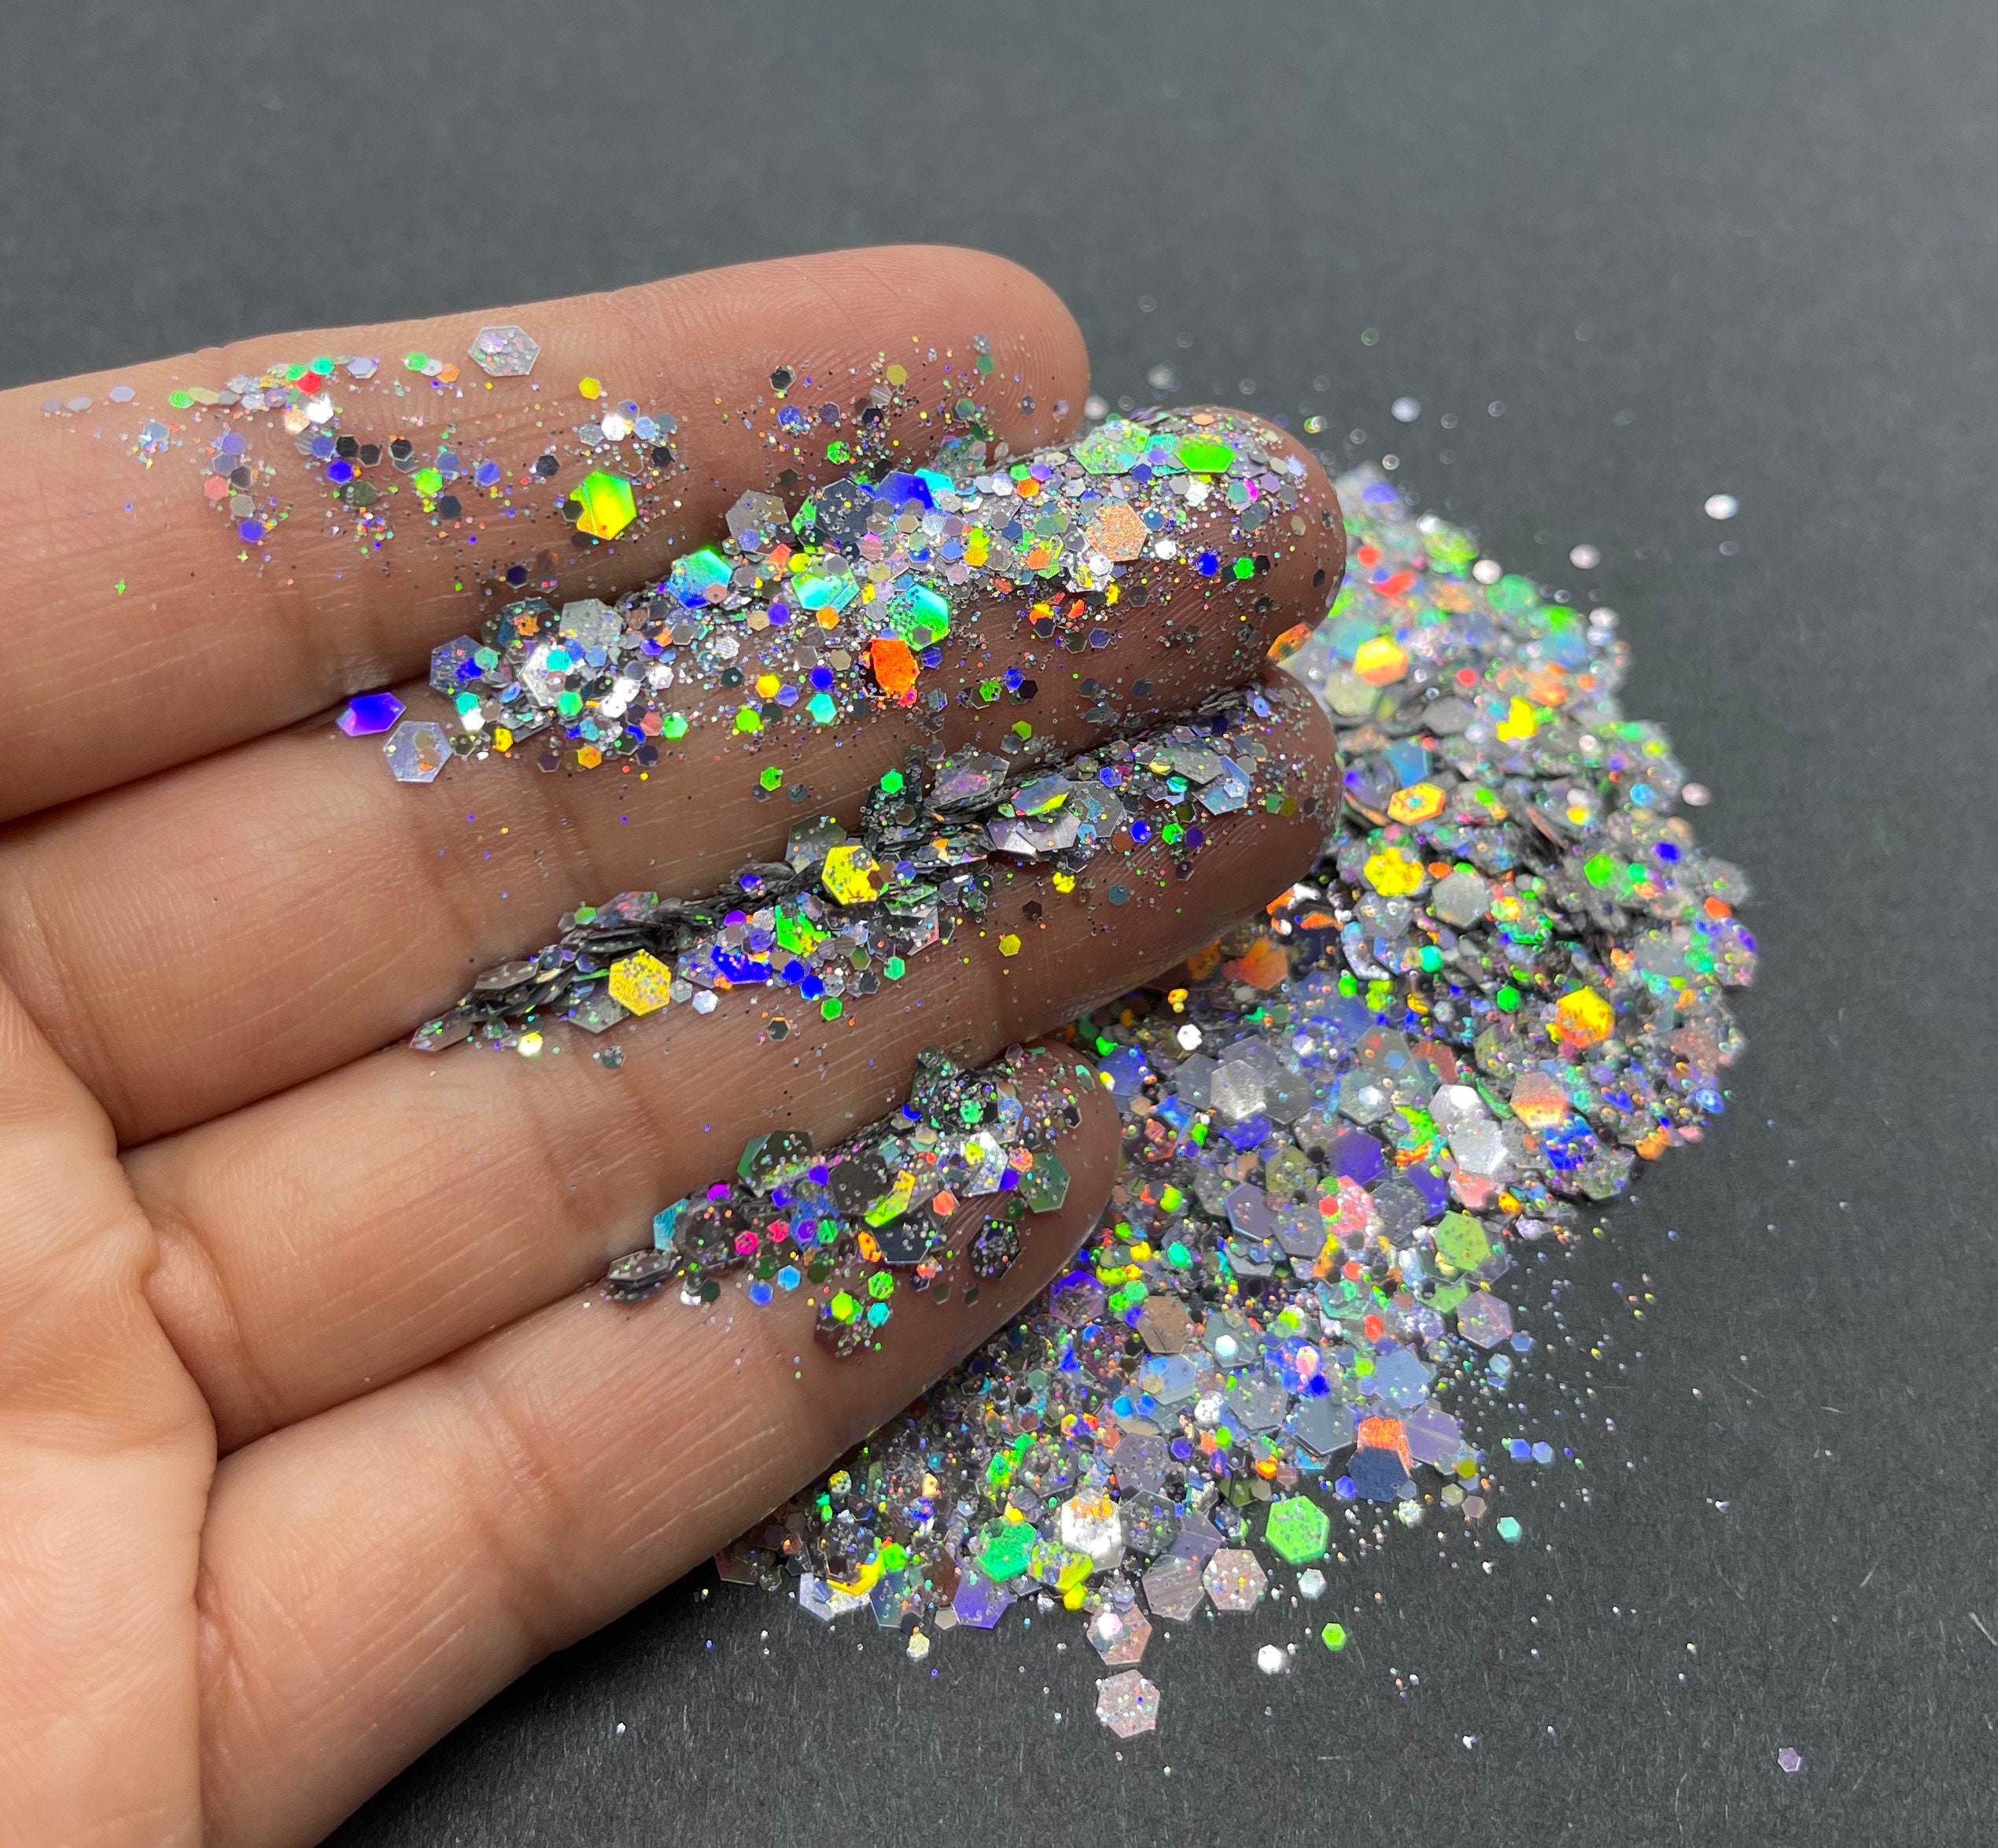 Extra Fine Glitter Powder Set of 28 Colors Body Cosmetic Glitter Nail Arts  Face Hair Eye Lip Gloss Makeup Holographic Iridescent Fine Glitter Slime  Tumbler and Epoxy Resin Crafts Glitter